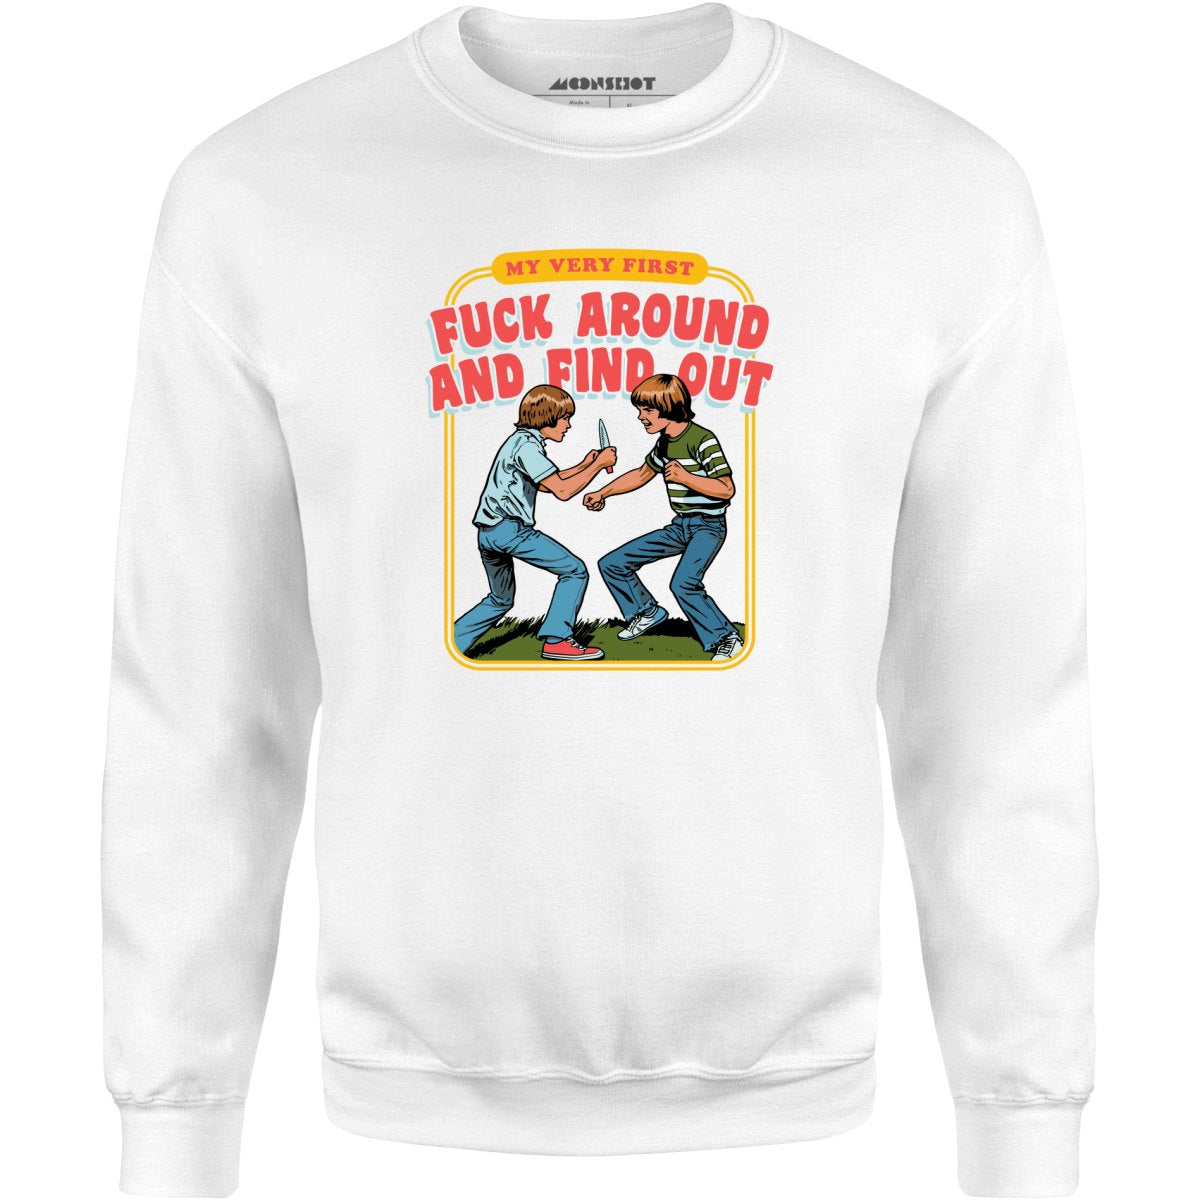 My Very First Fuck Around and Find Out - Unisex Sweatshirt